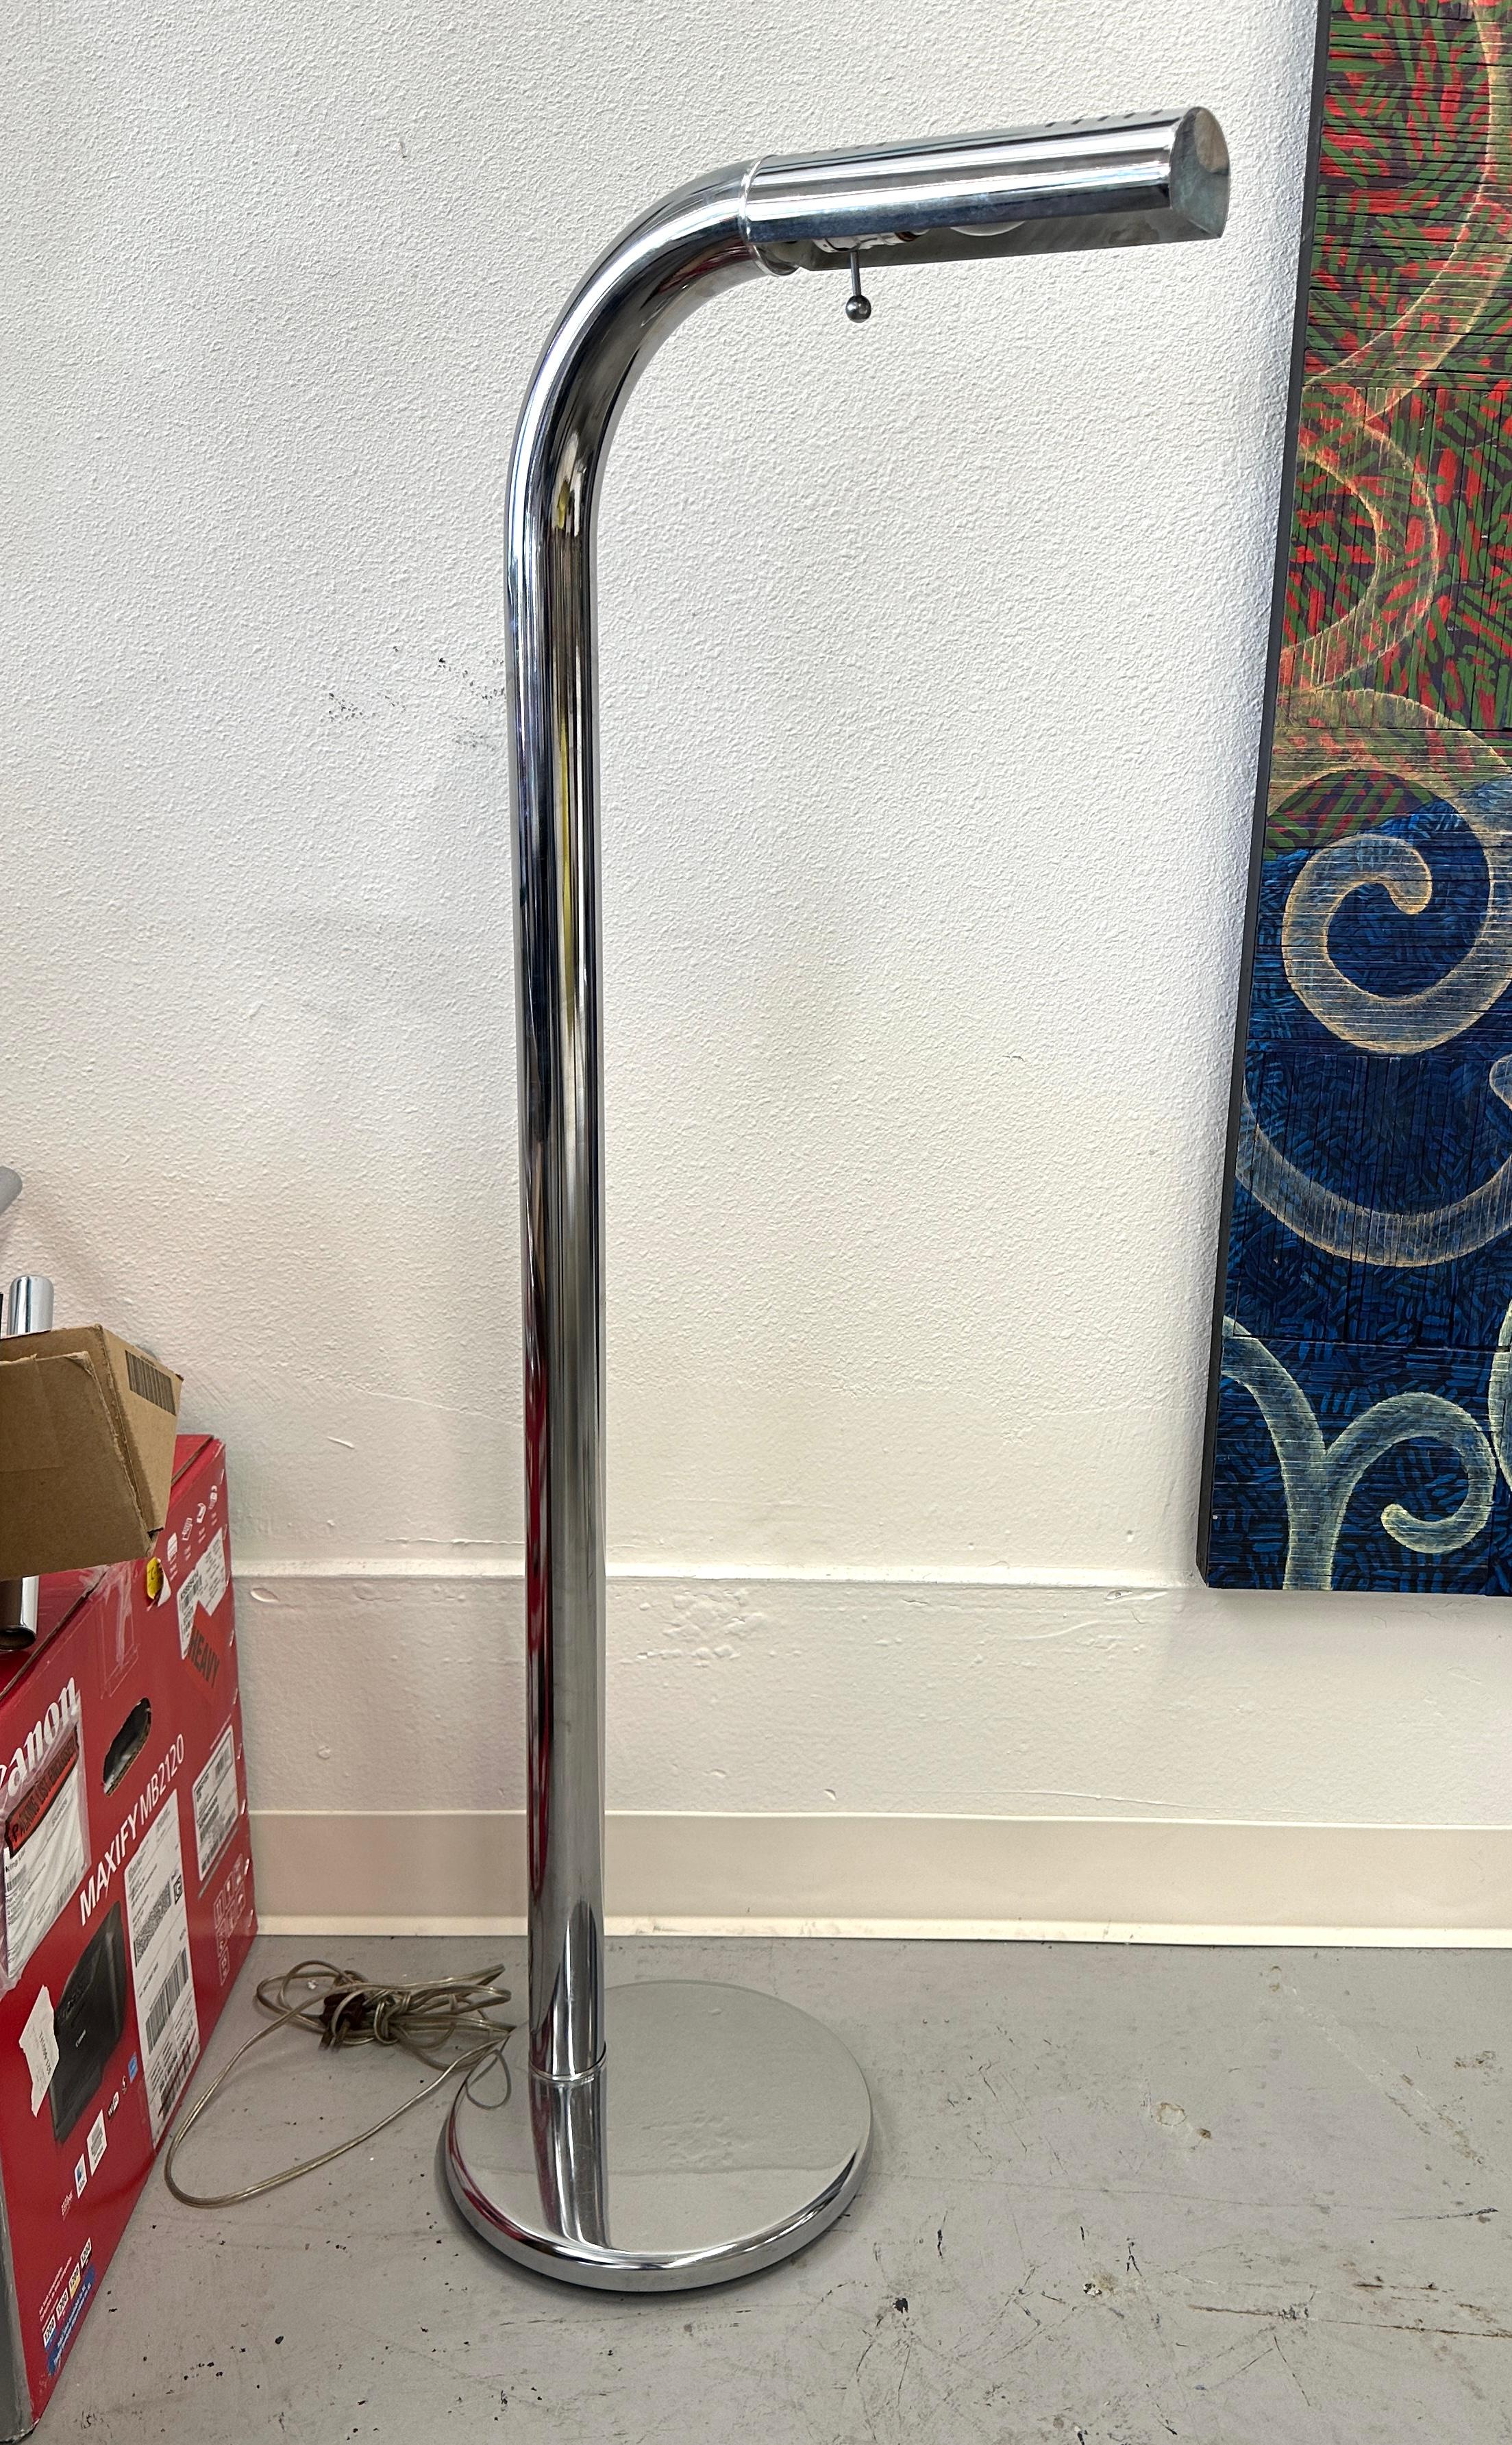 Nice vintage chromed floor lamp designed by Jim Bindman for the Rainbow Lamp Company. The lamp is working with an off on switch on the lamp head. 46 inches tall. In good age appropriate condition with some minor marks and surface scratches to the